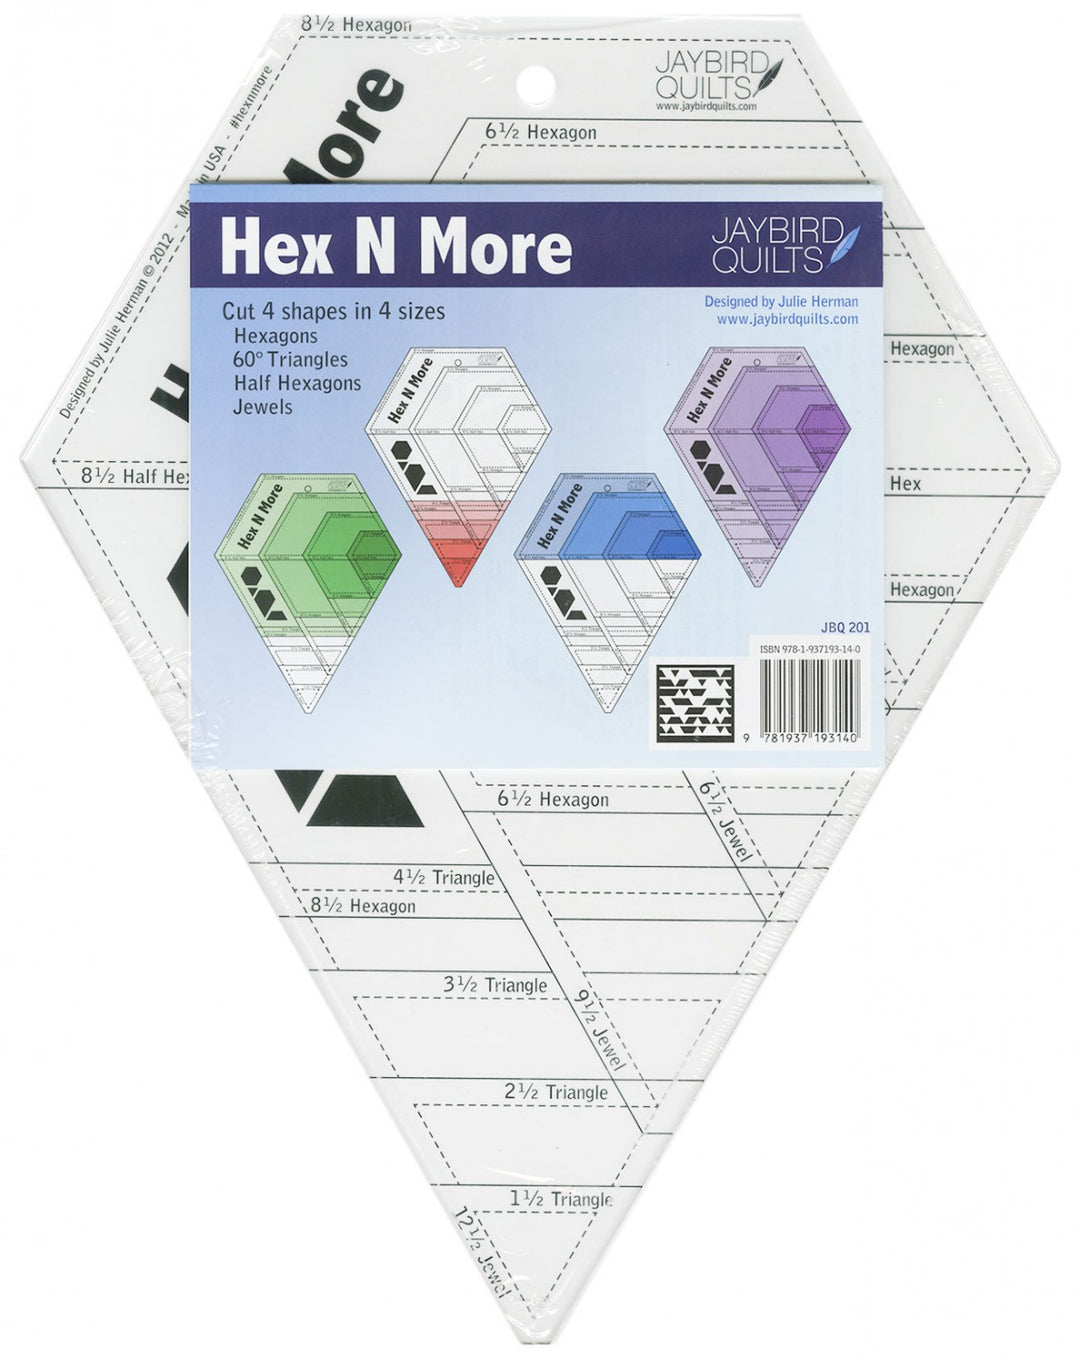 Hex 'N More - Jaybird Quilts - Acrylic Template